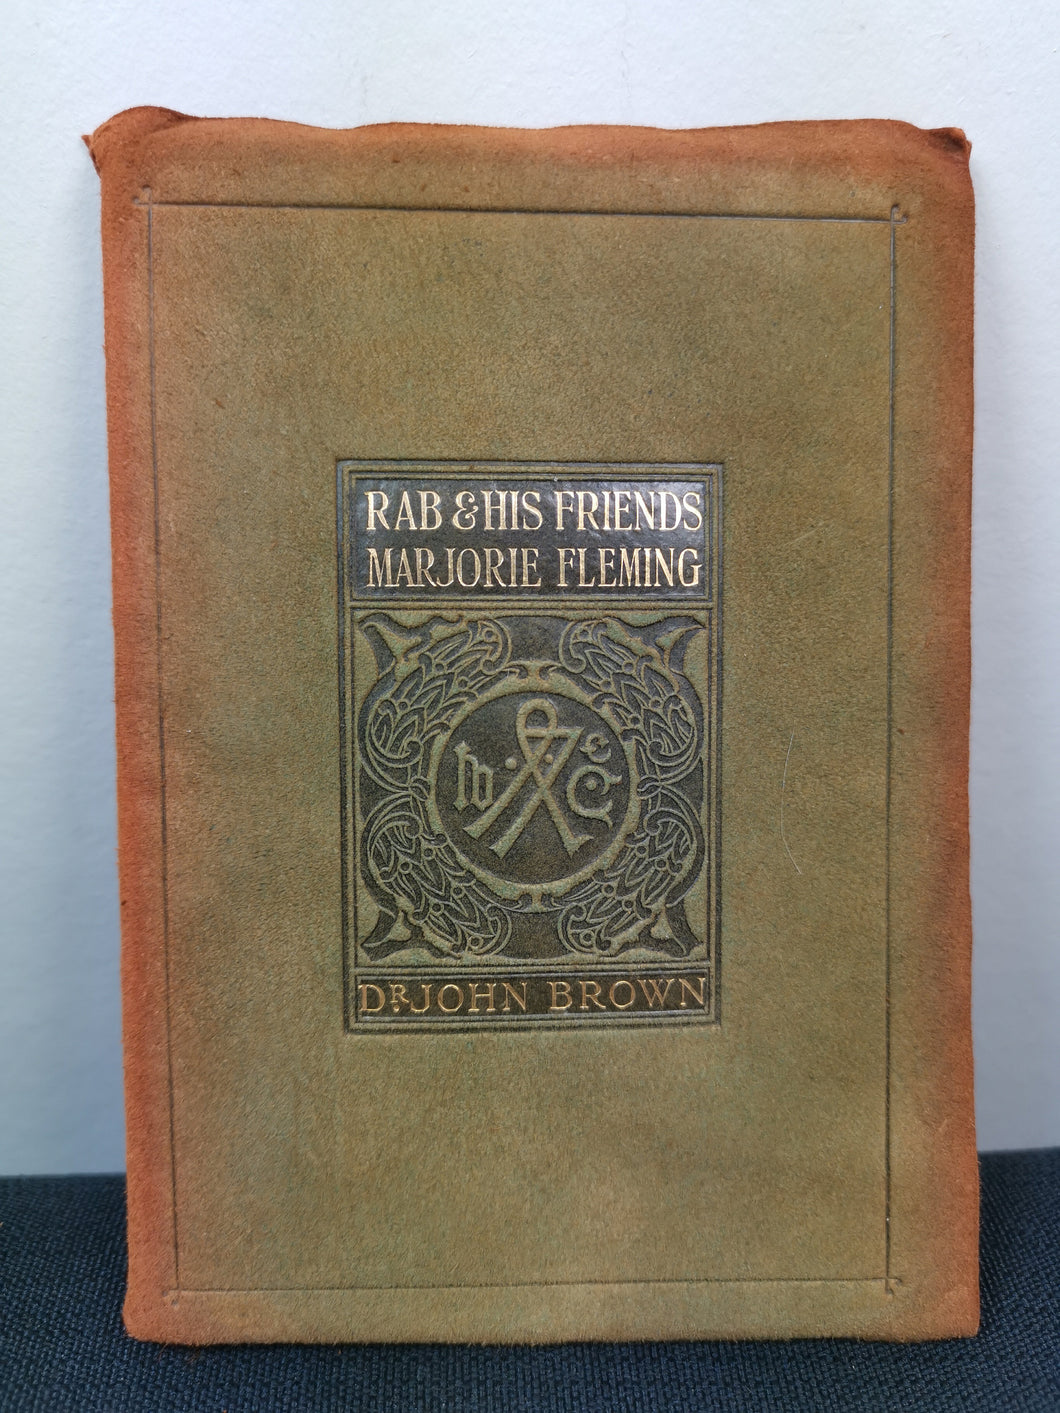 Antique Rab and His Friends by Marjorie Fleming Book Suede Leather Bound Circa 1900